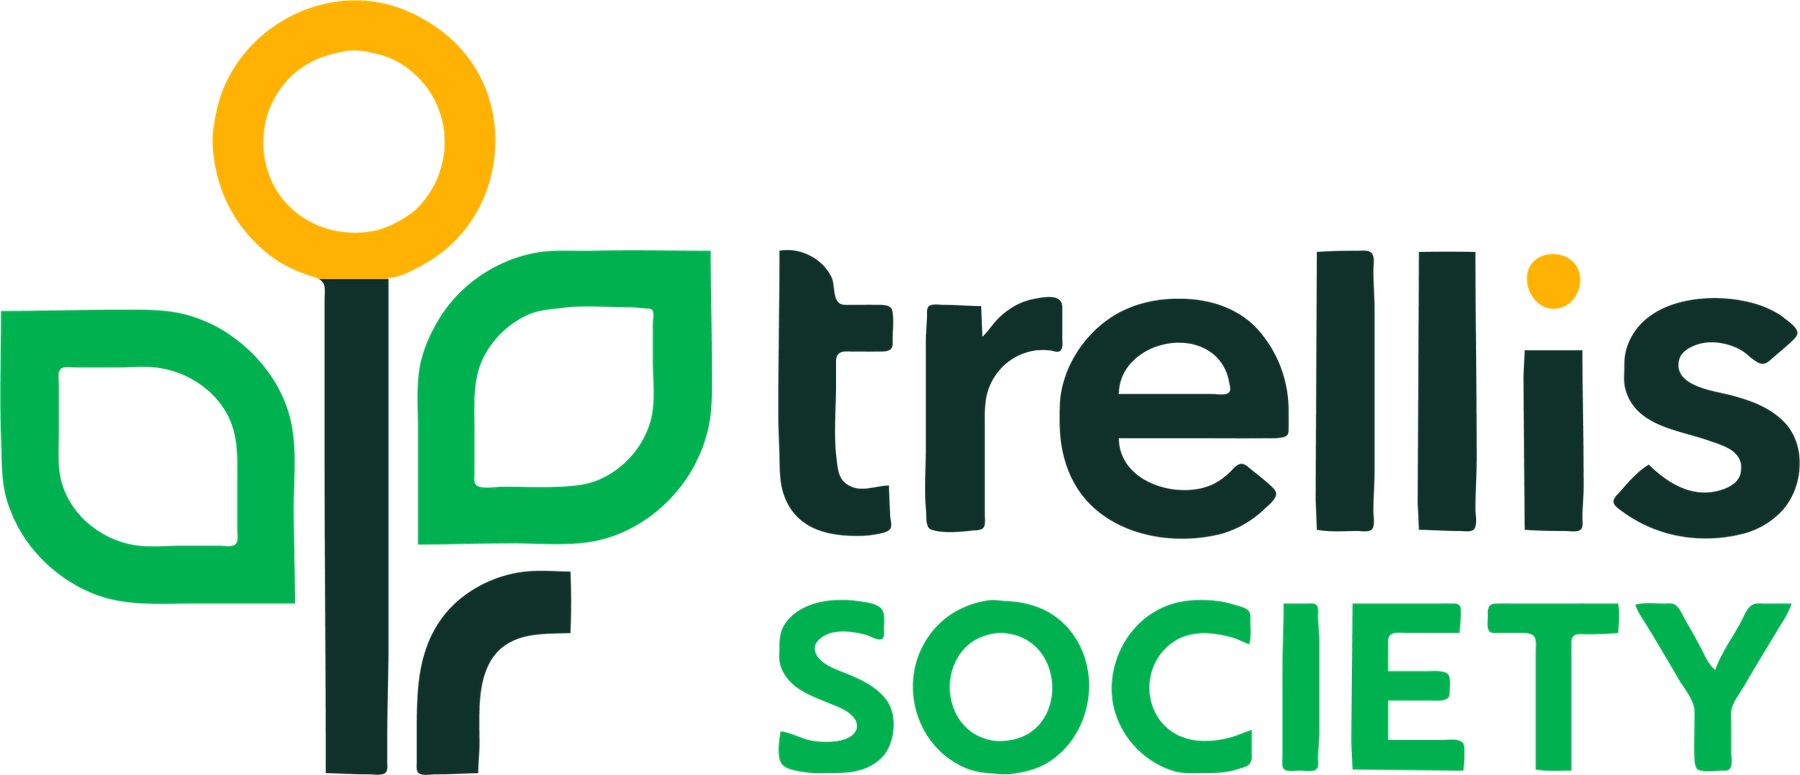 Trellis Society logo in color on a transparent background